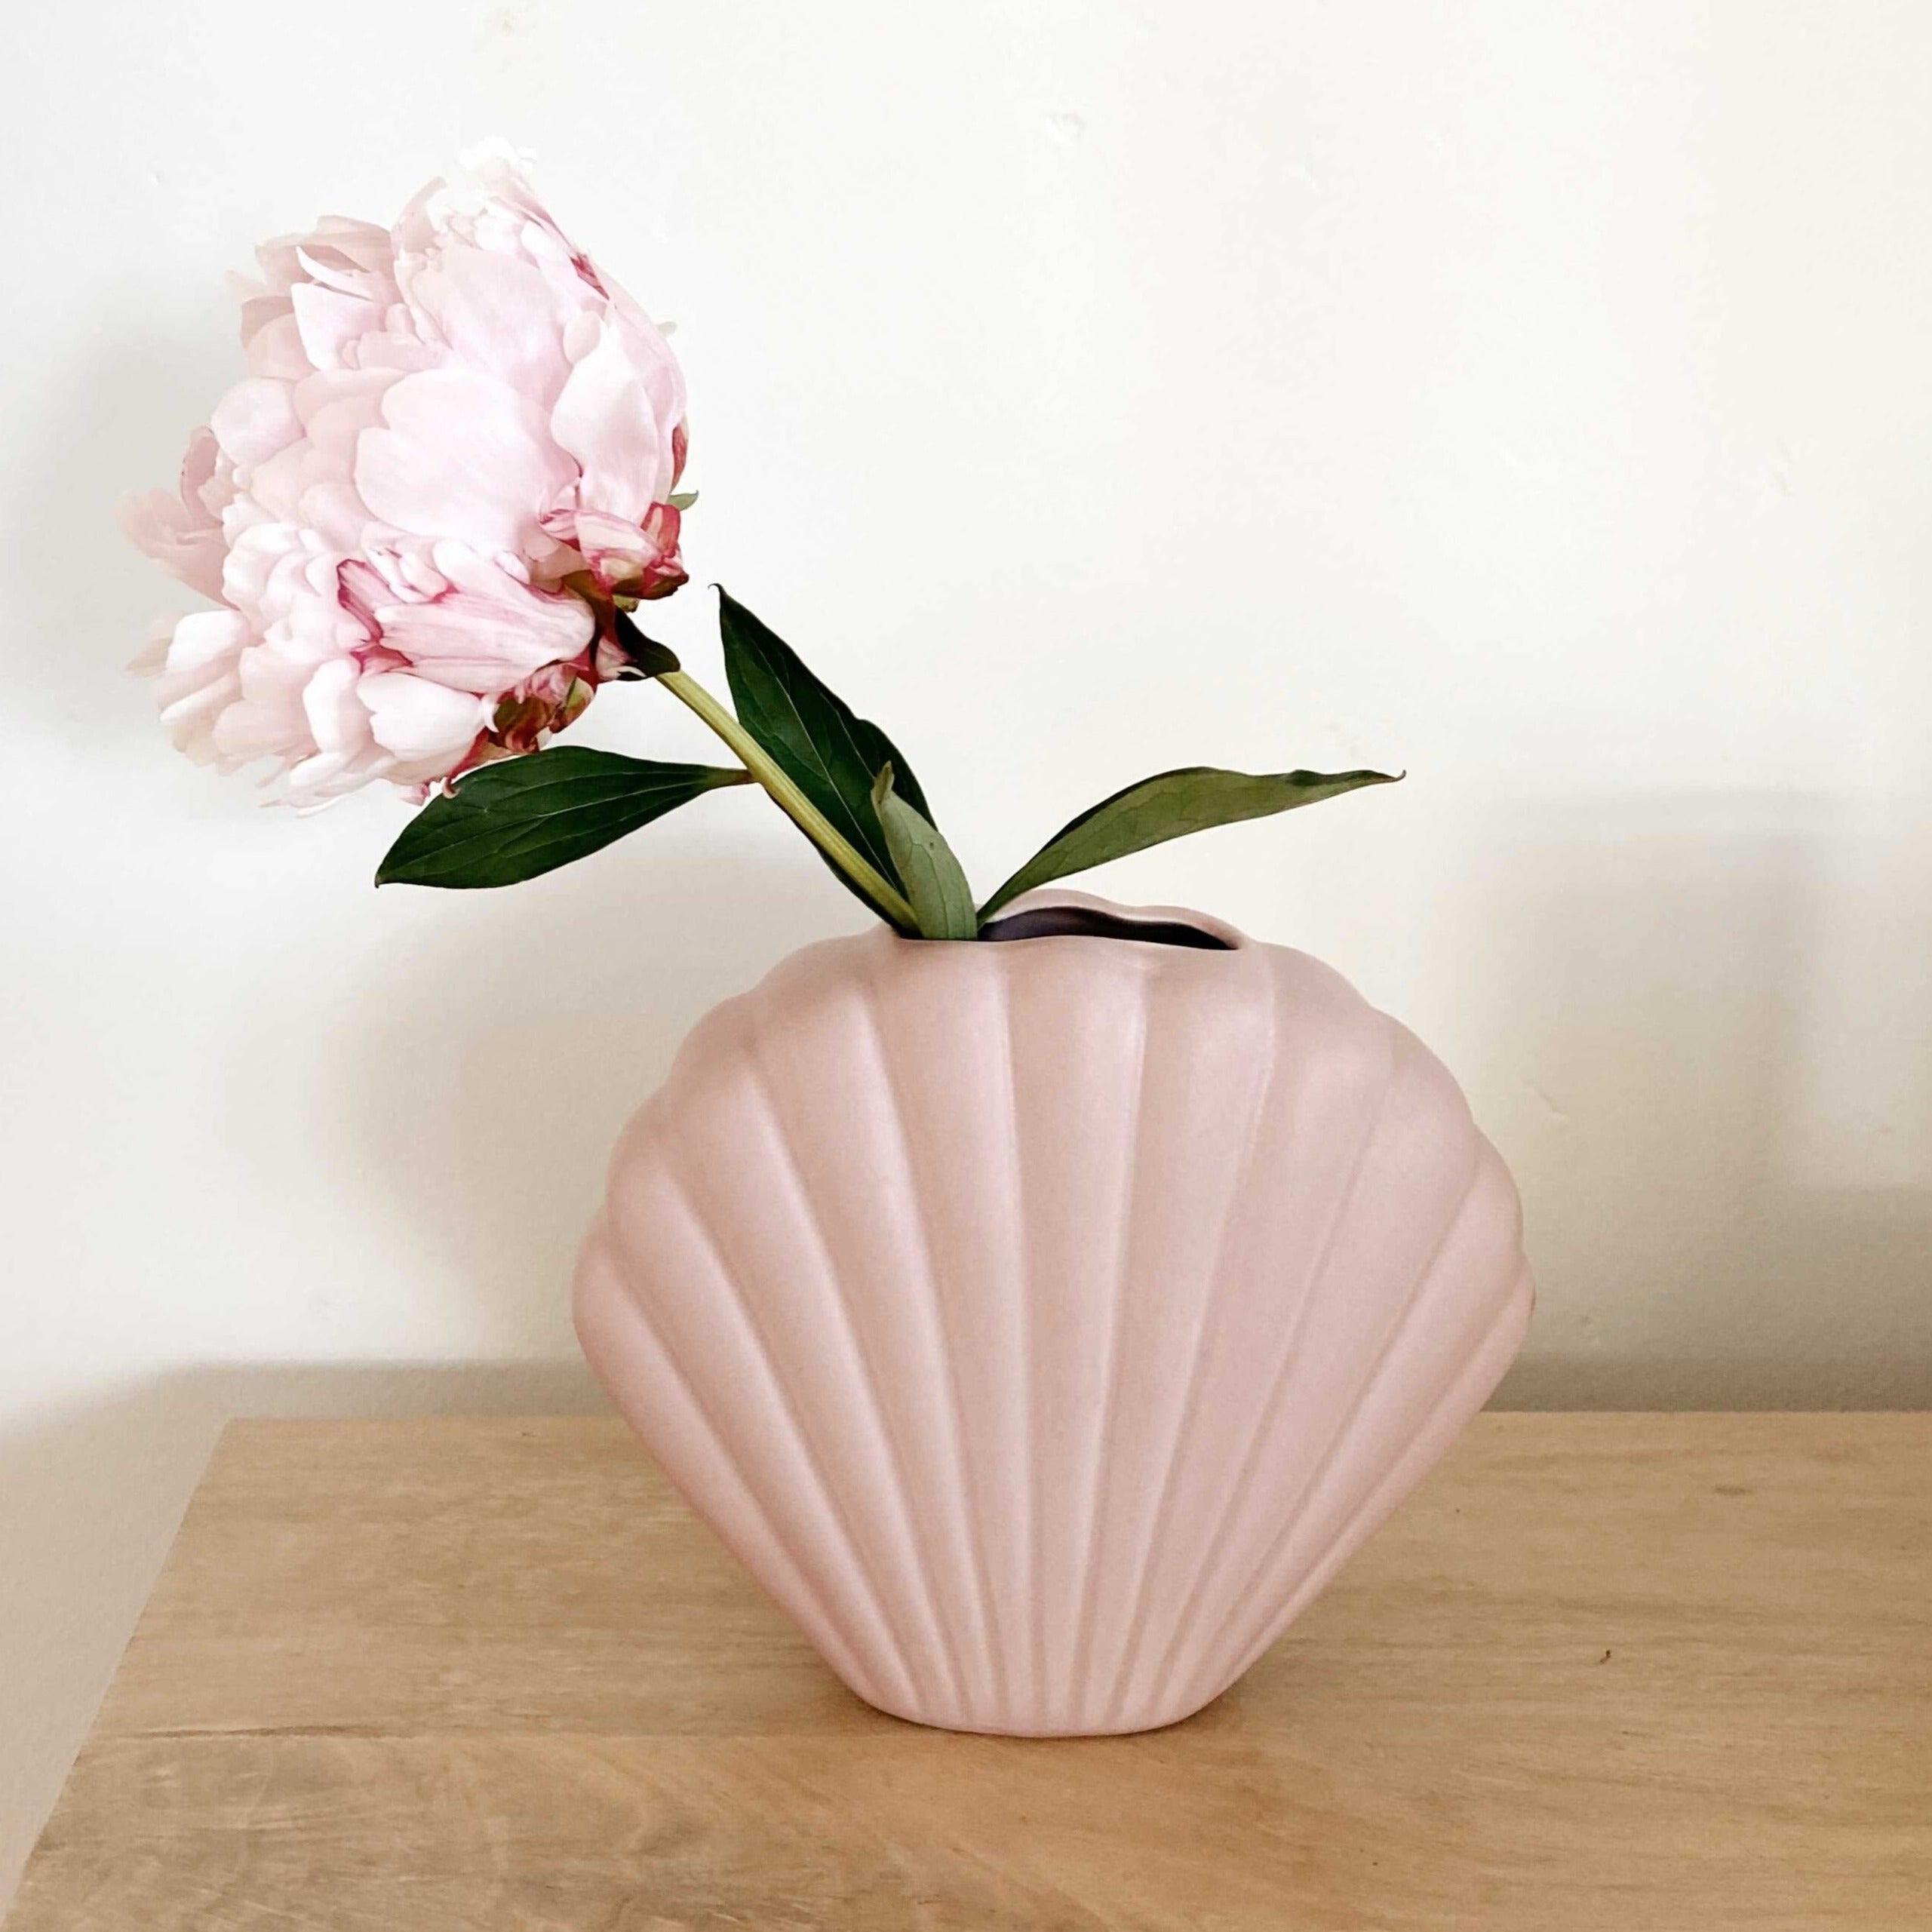 Shell vase with single pink peony.